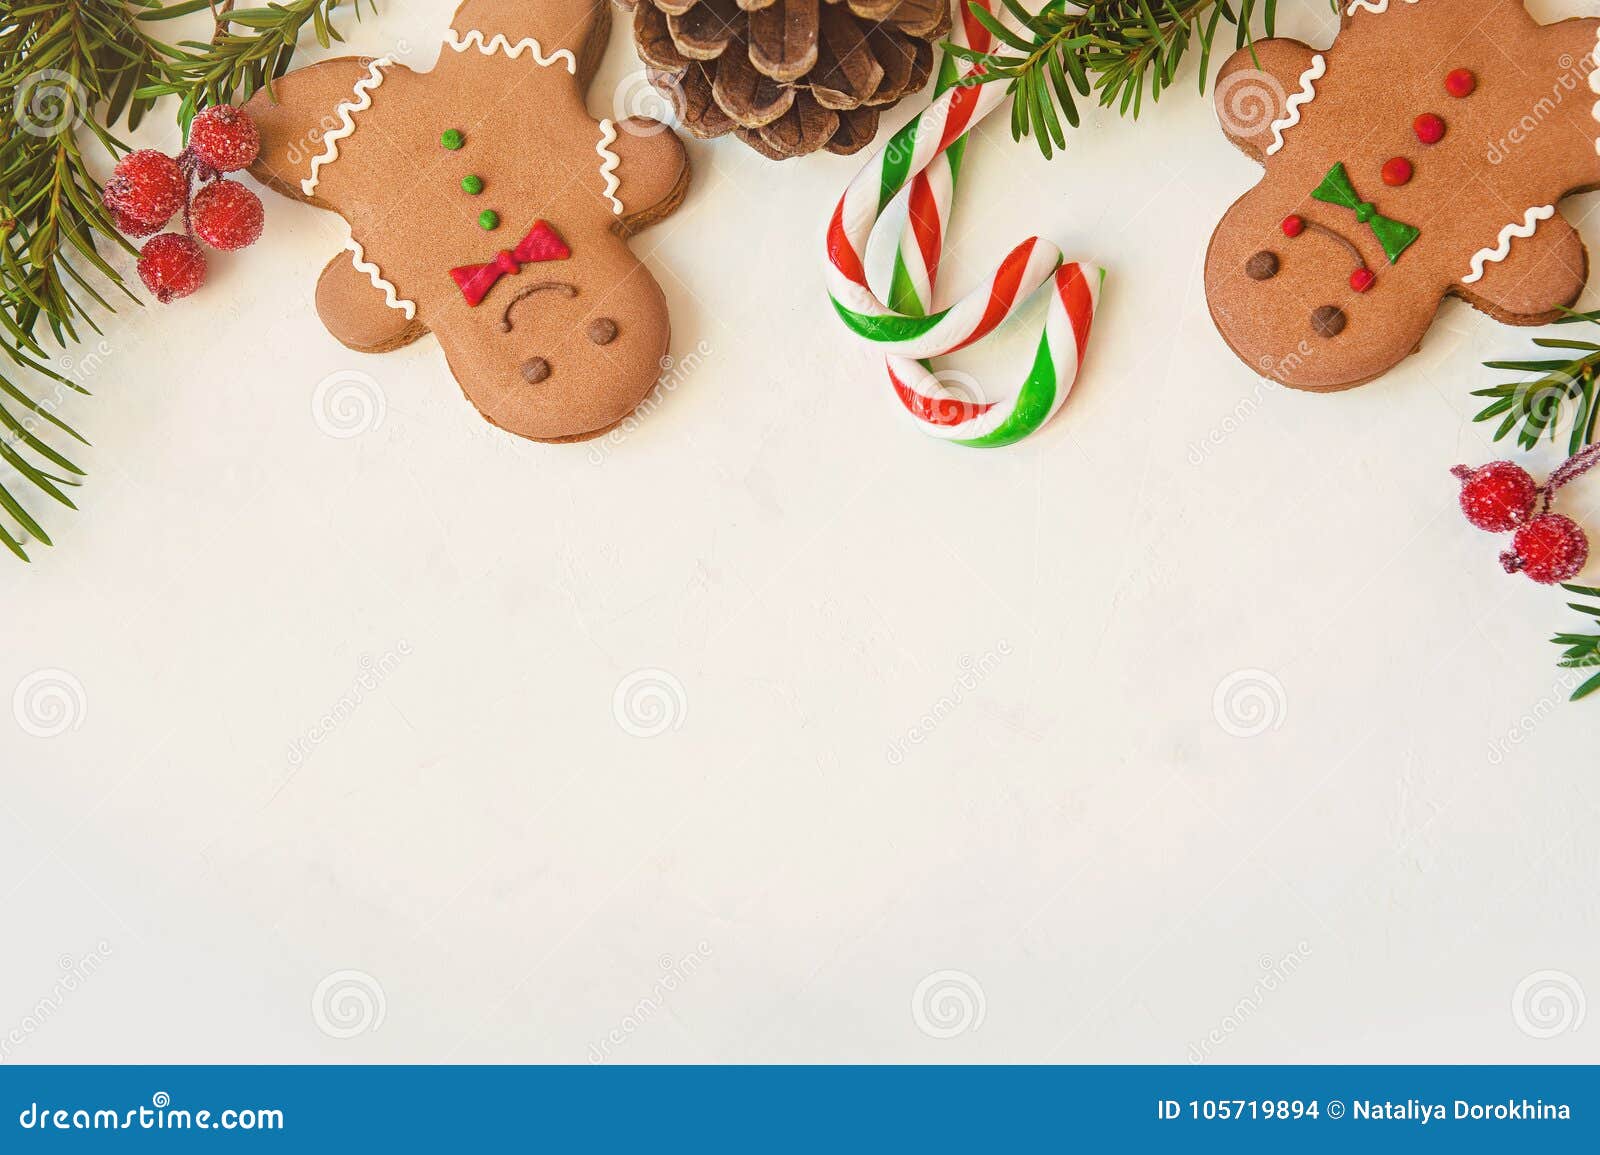 Christmas Homemade Gingerbread Man Cookies Stock Photo - Image of  decoration, gingerbread: 105719894